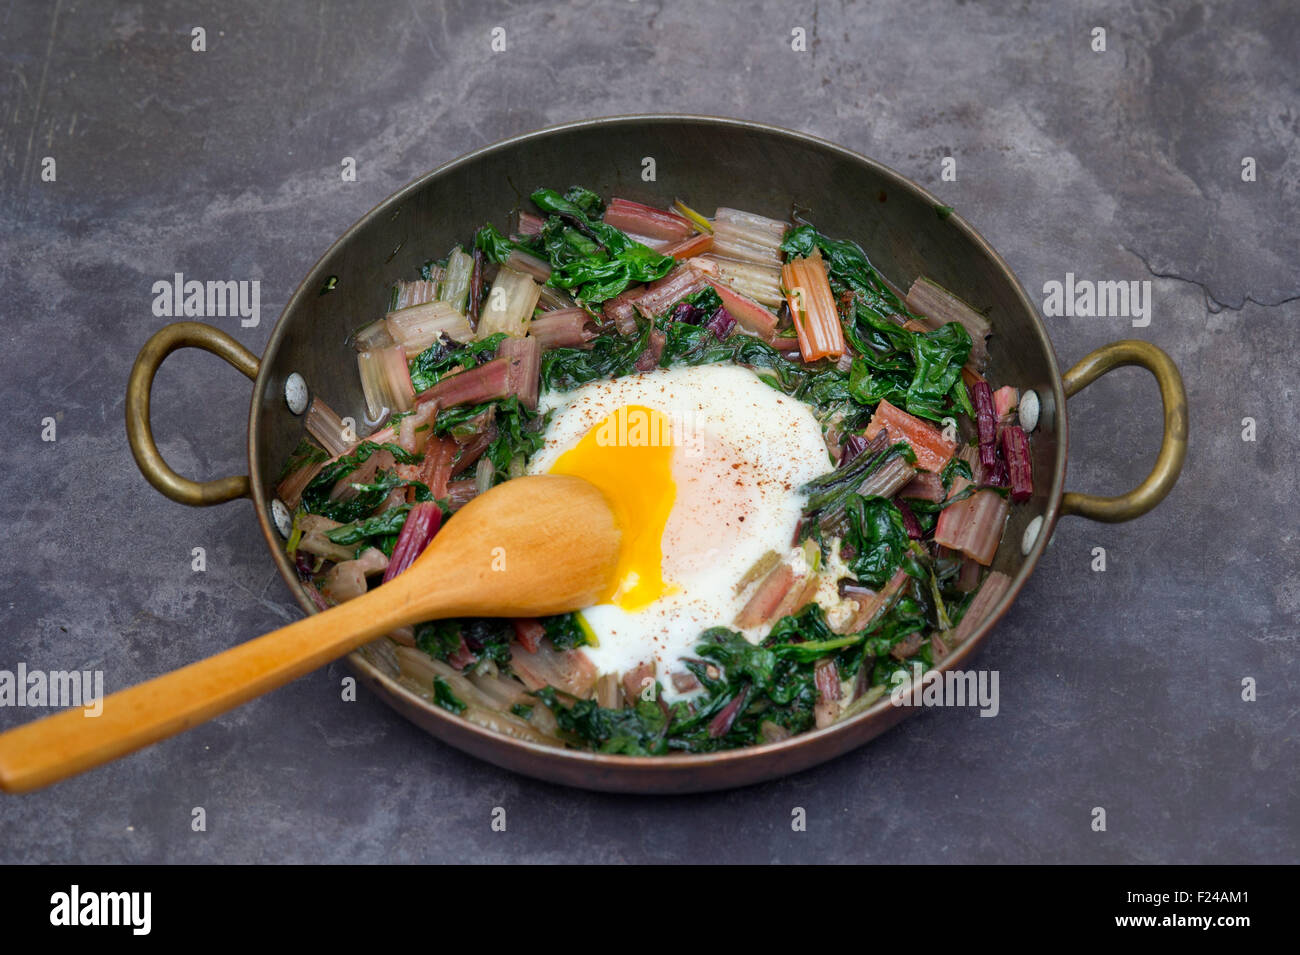 Paleo diet food, Swiss rainbow chard with a poached egg on top. This diet uses supposedly 'cave man' or Palaeolithic foods. a UK Stock Photo